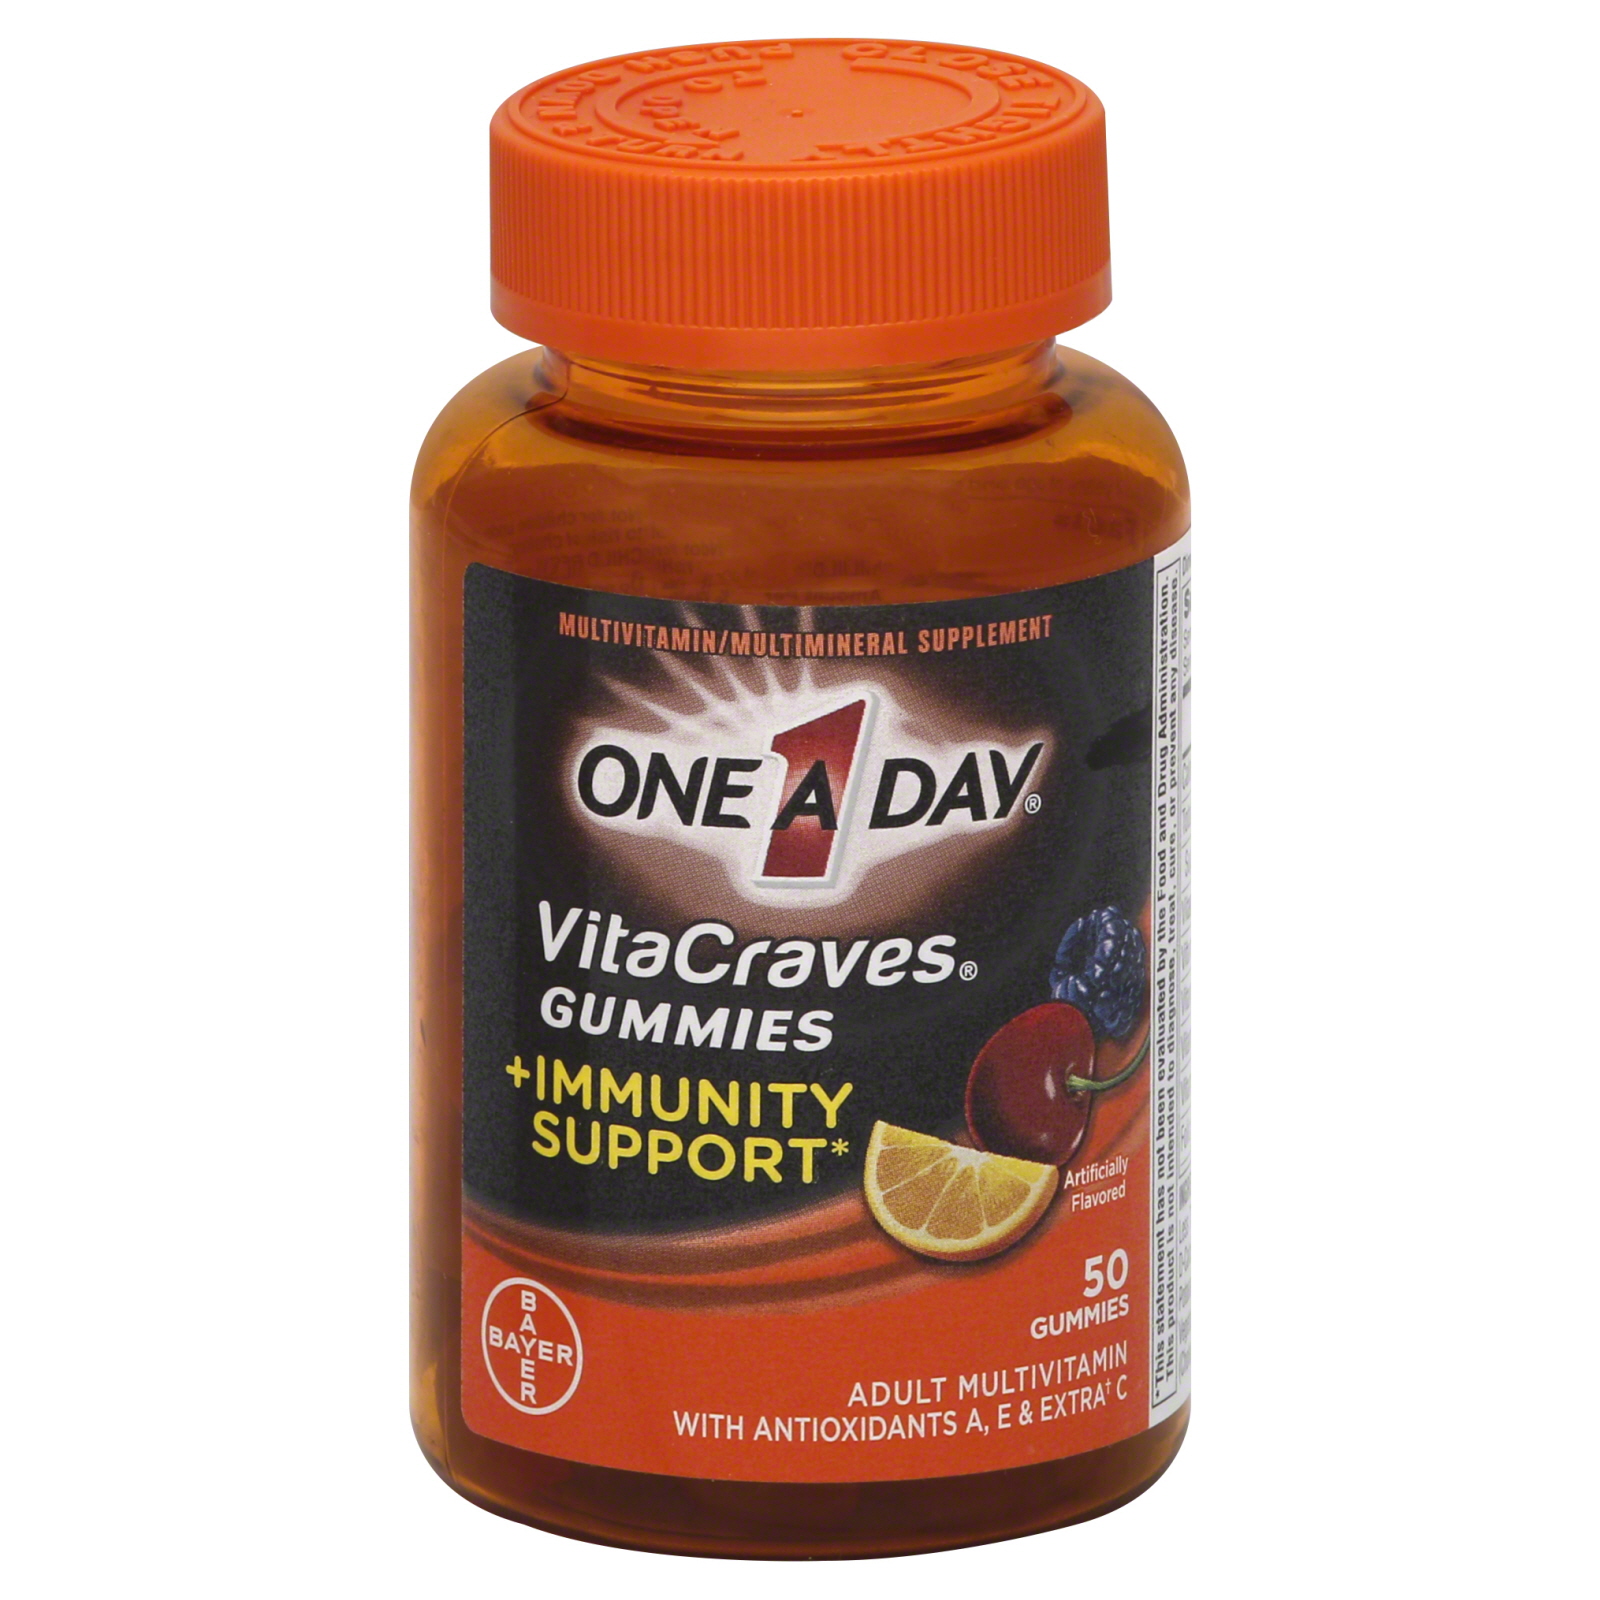 ONE A DAY VitaCraves Multivitamin, Complete Adult, Gummies 50 gummies